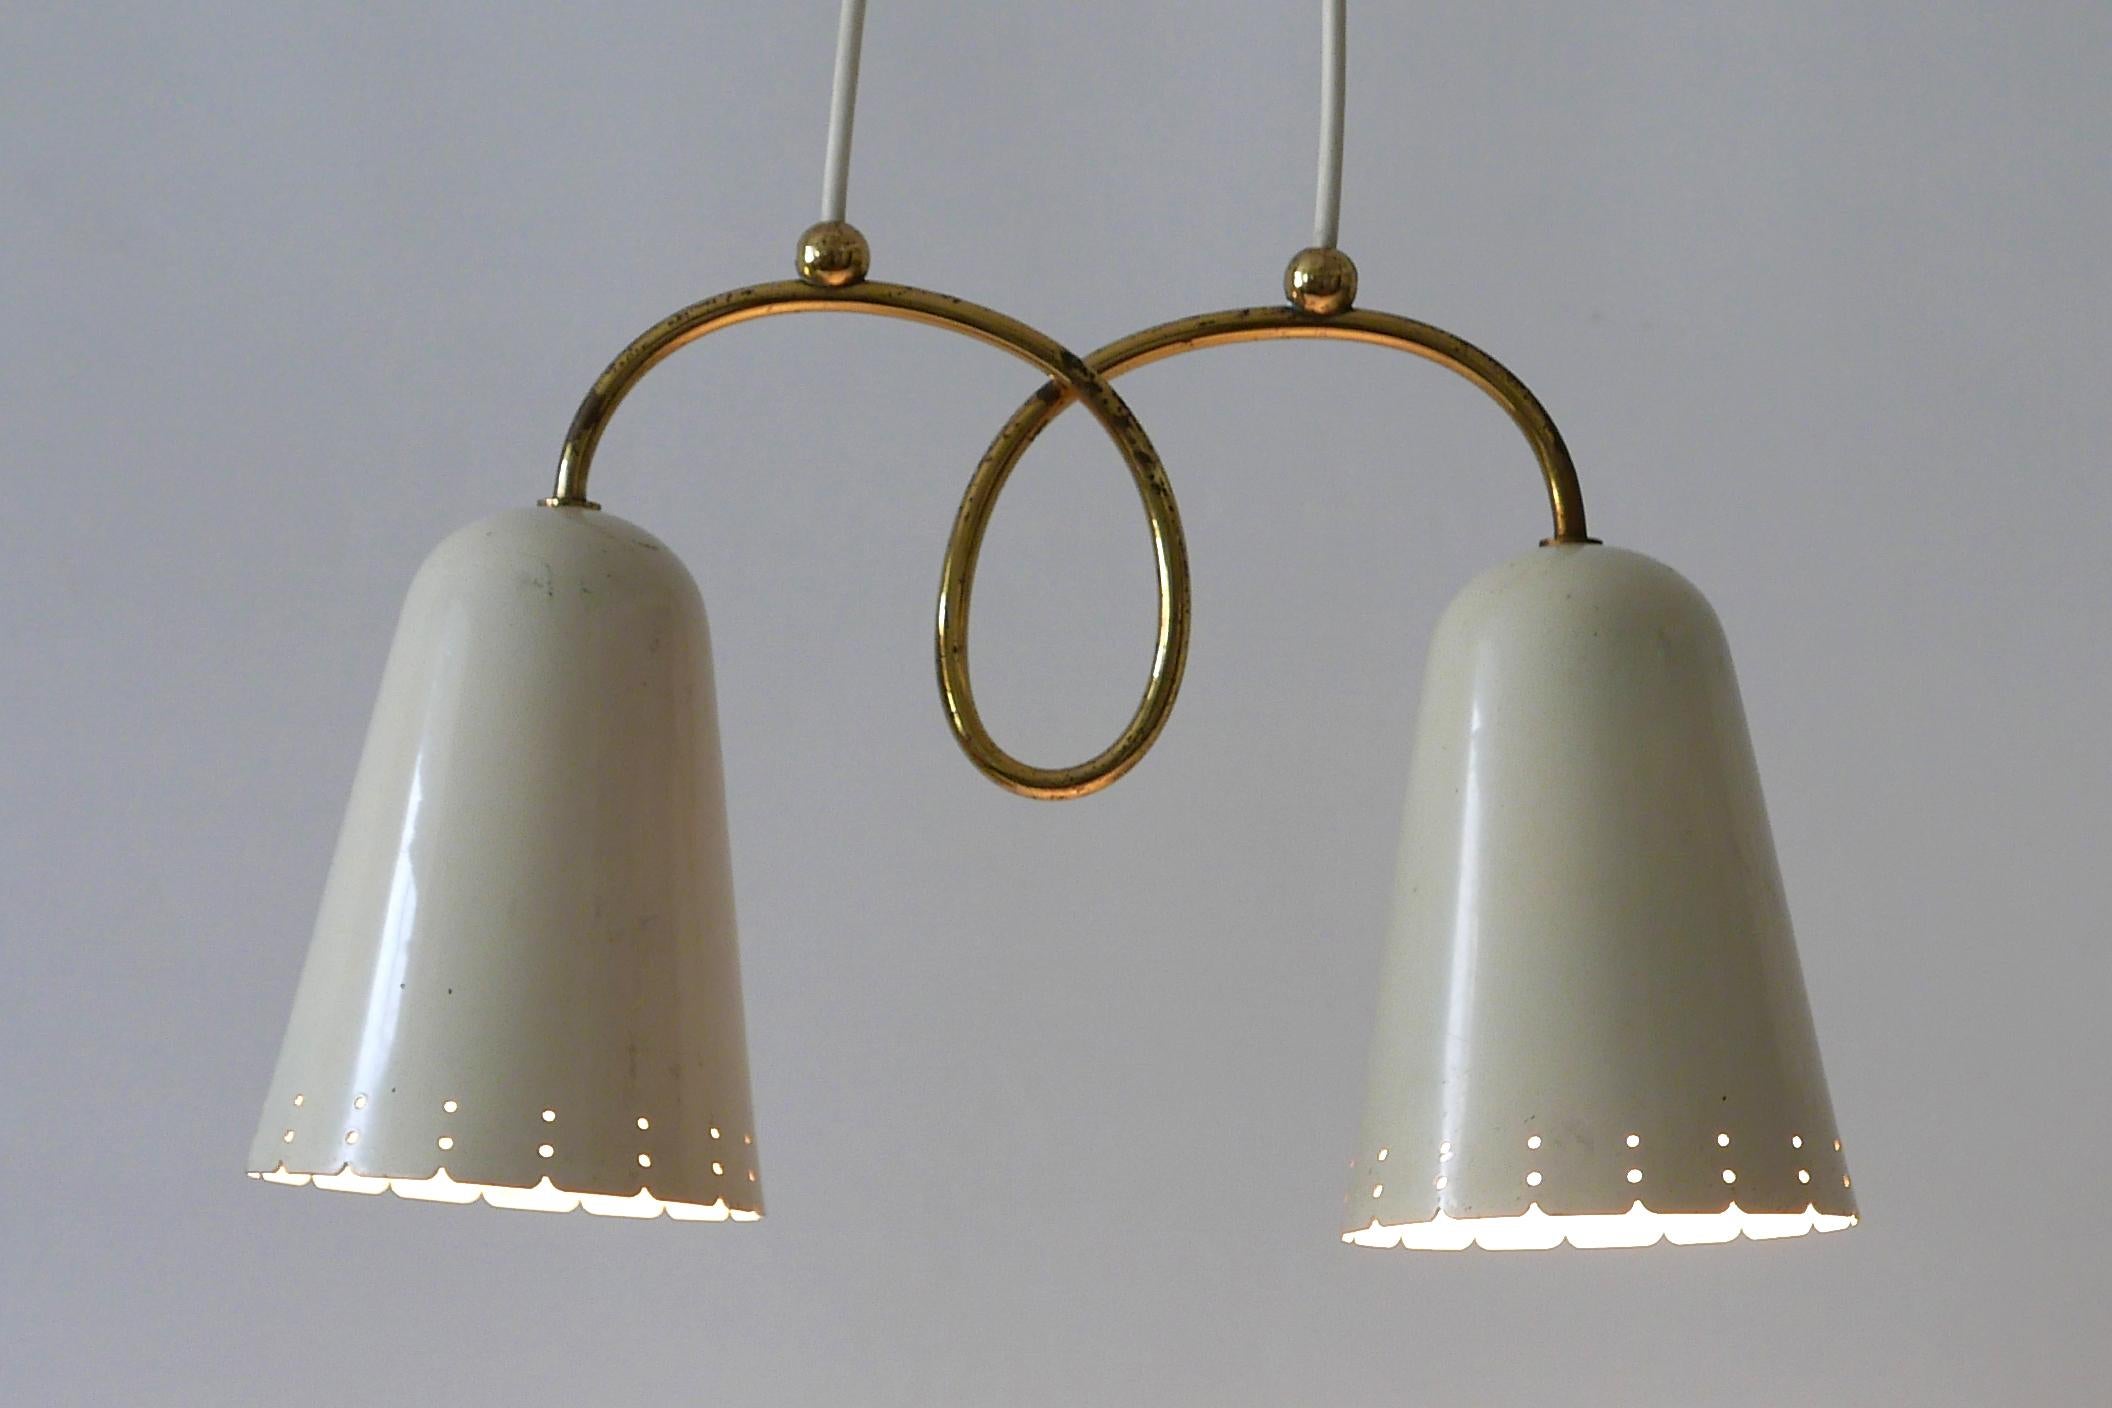 Extremely rare and elegant Mid-Century Modern pendant lamp or hanging light with two perforated shades. Manufactured probably in 1950s in Germany.

Executed in beige enameled and perforated aluminum and brass, it needs 2 x E27 / E26 Edison screw